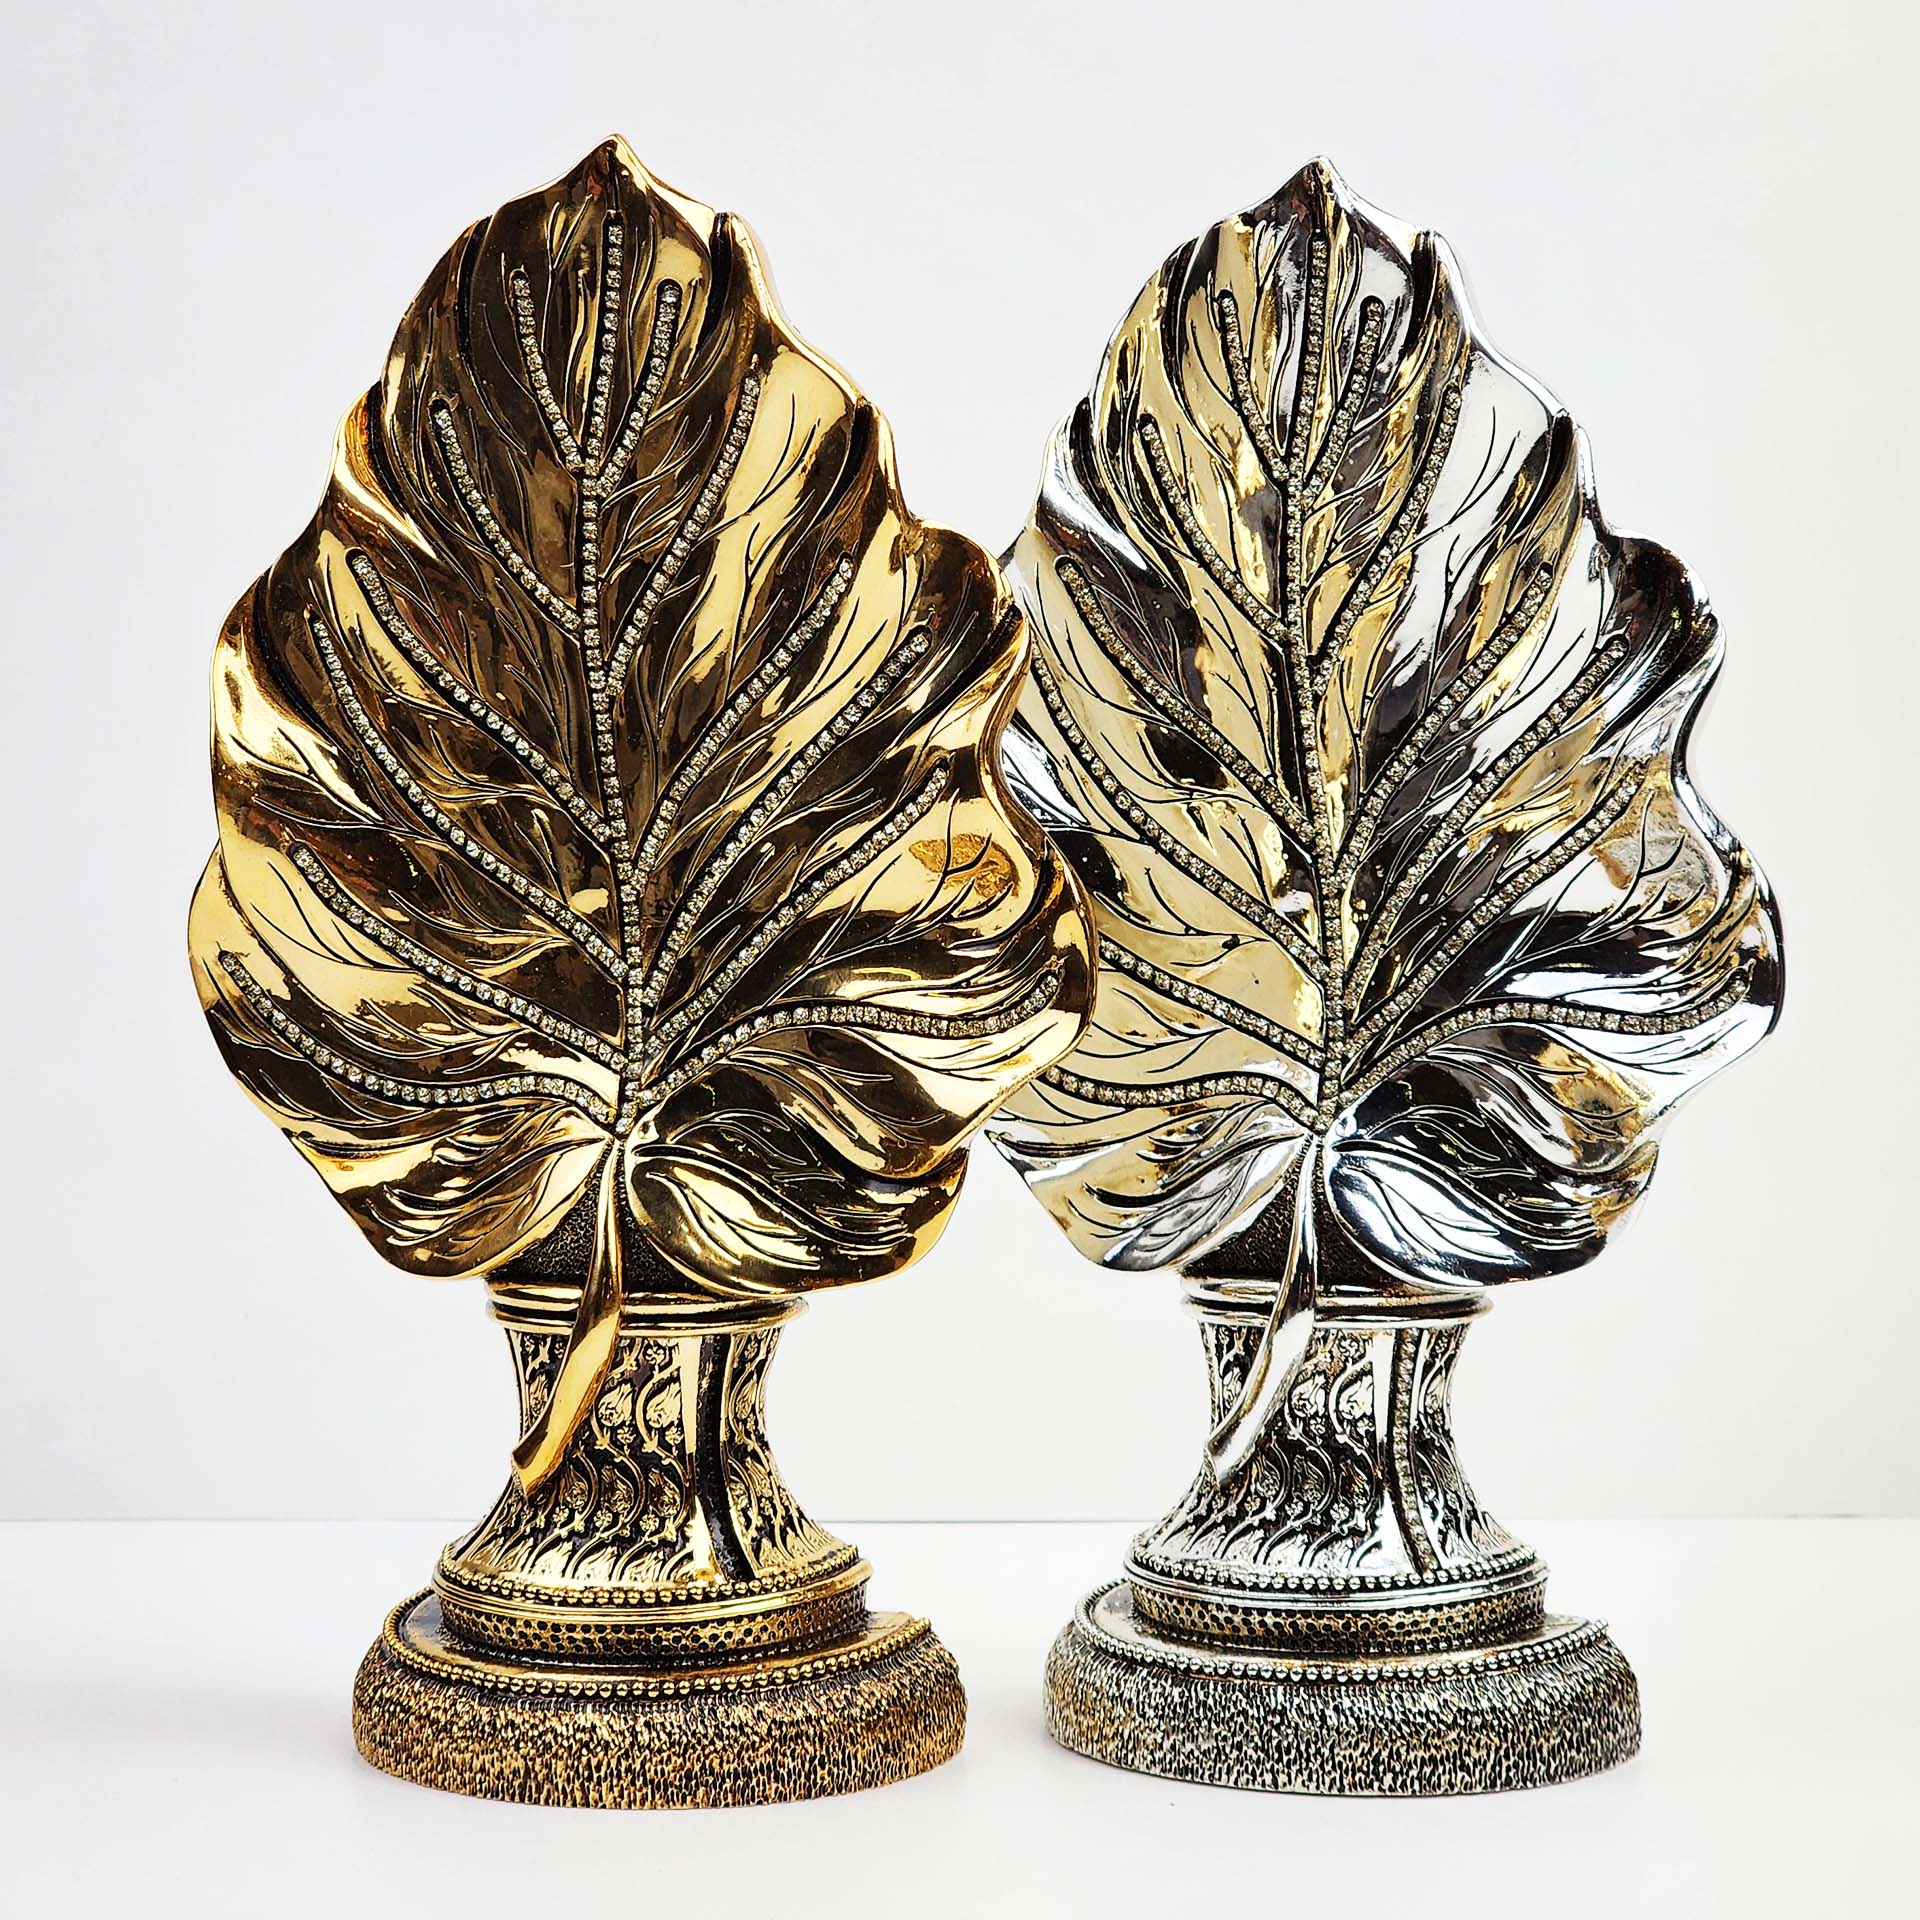 Leafe of Heart 2 pcs - Gold\Silver